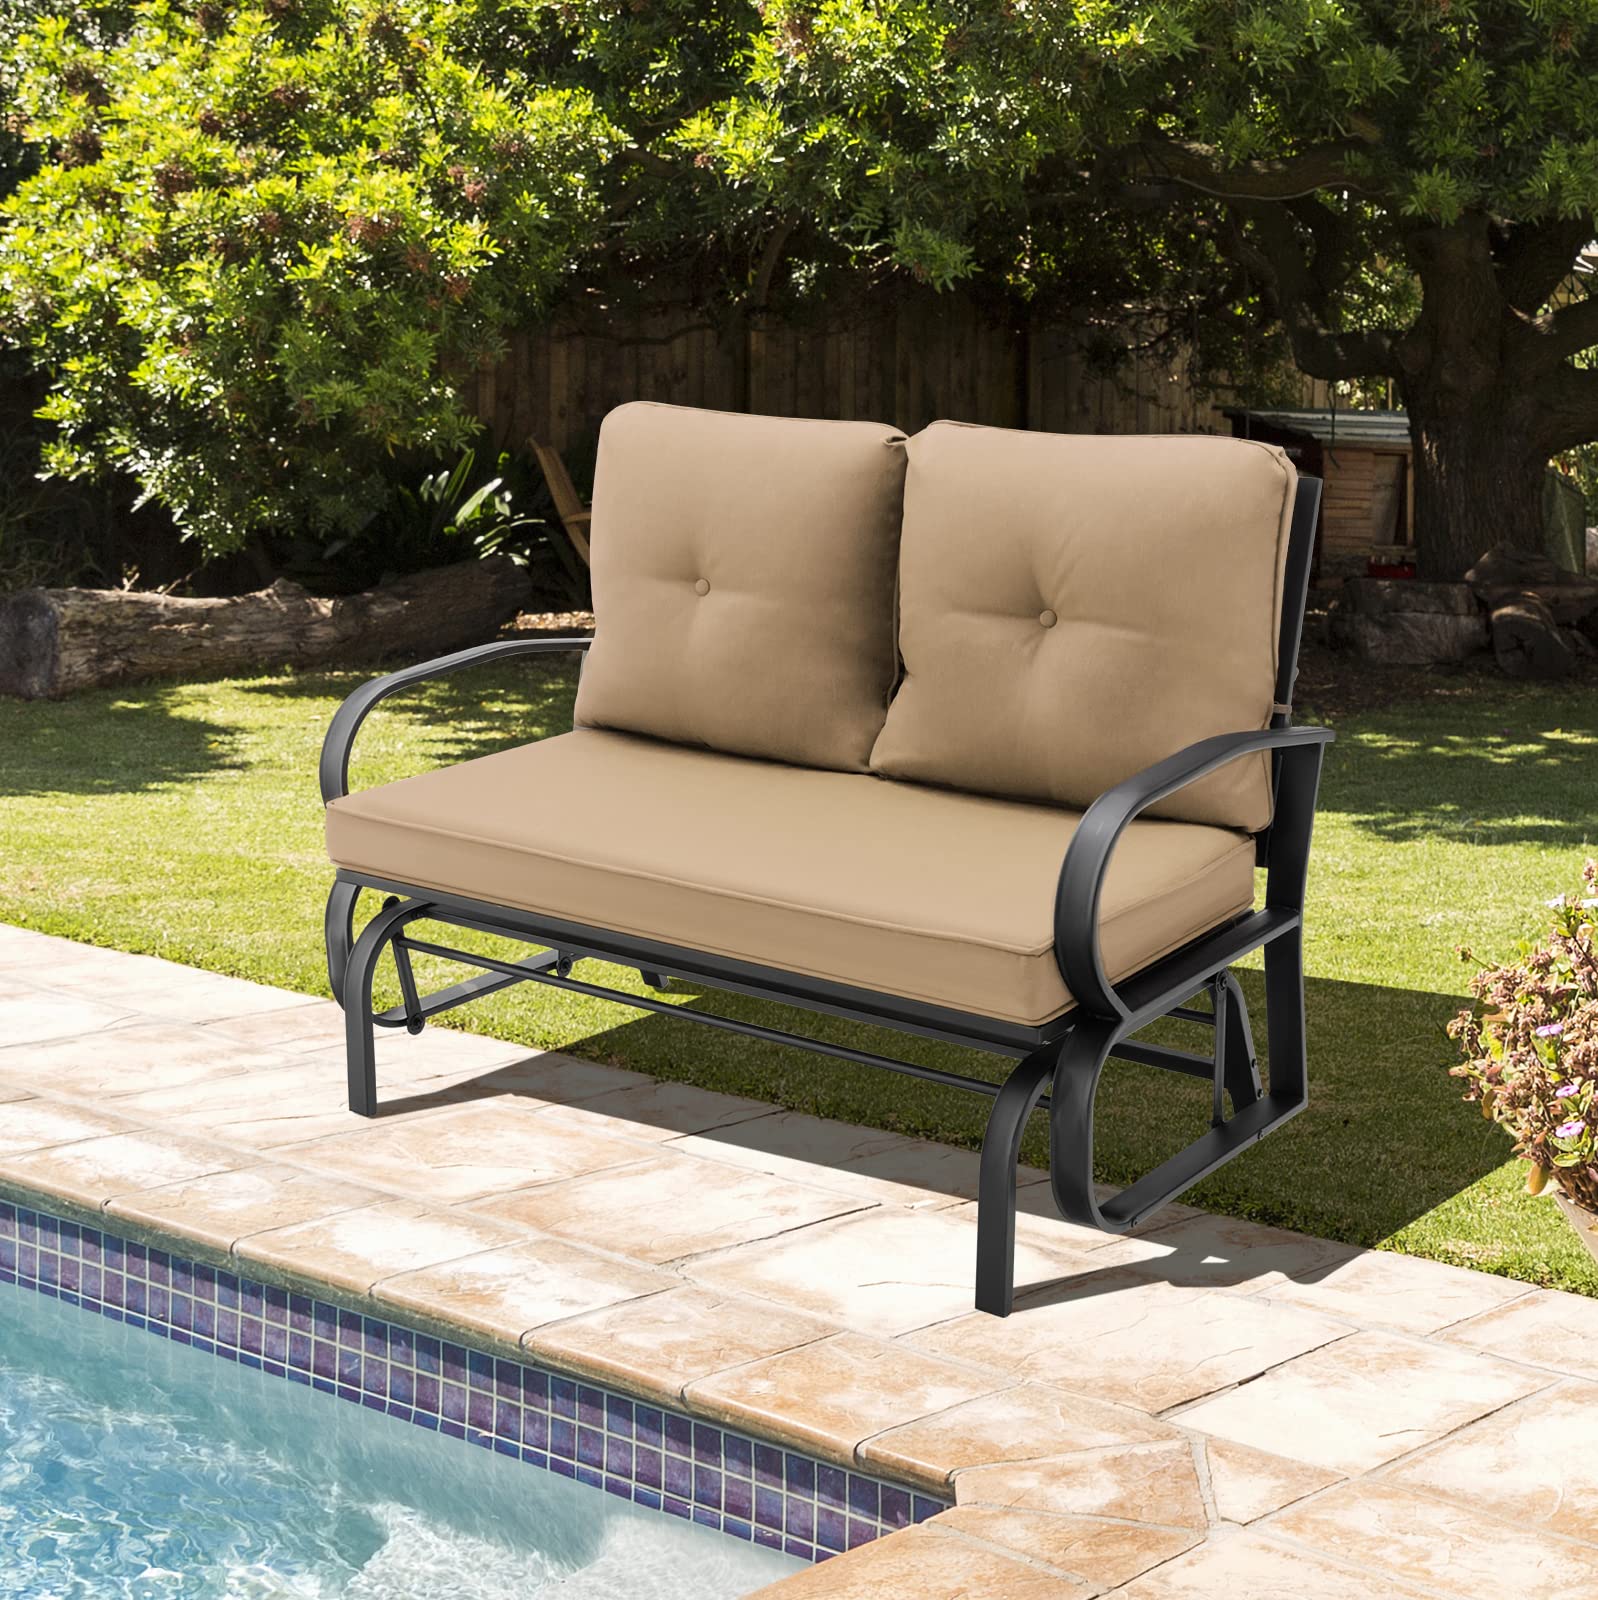 Giantex 2 Seats Glider Bench for Outside, Patio Glider Porch Loveseat w/Cushions & Powder Coated Steel Frame